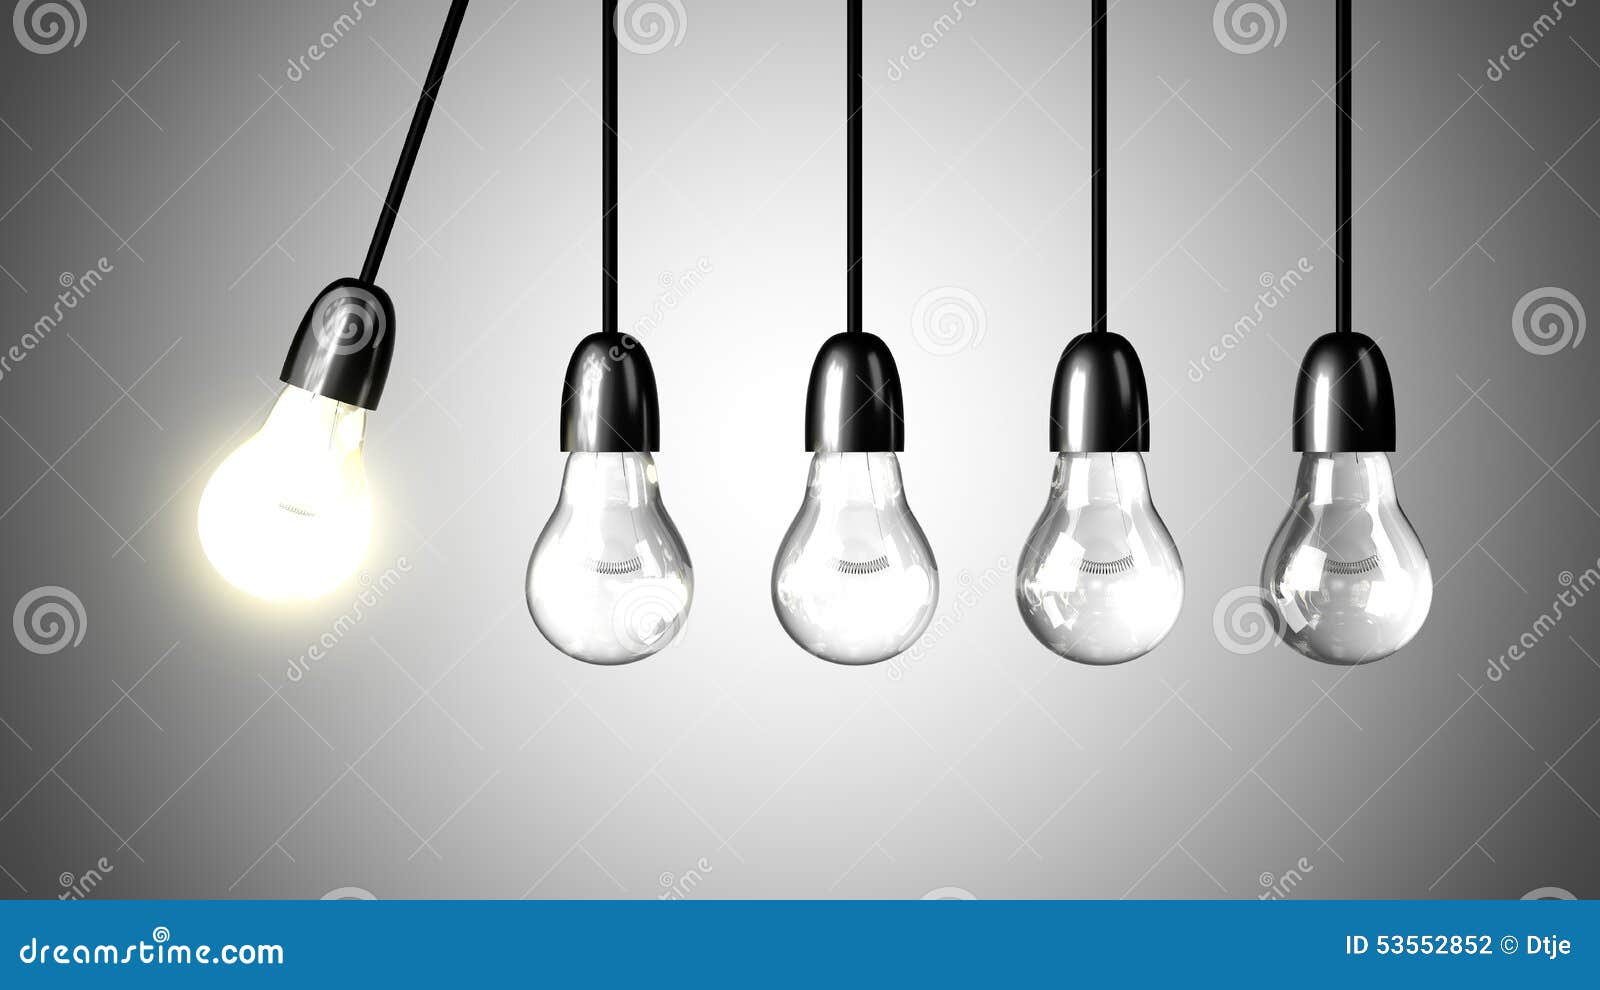 a light bulb will boost extinguished bulbs.